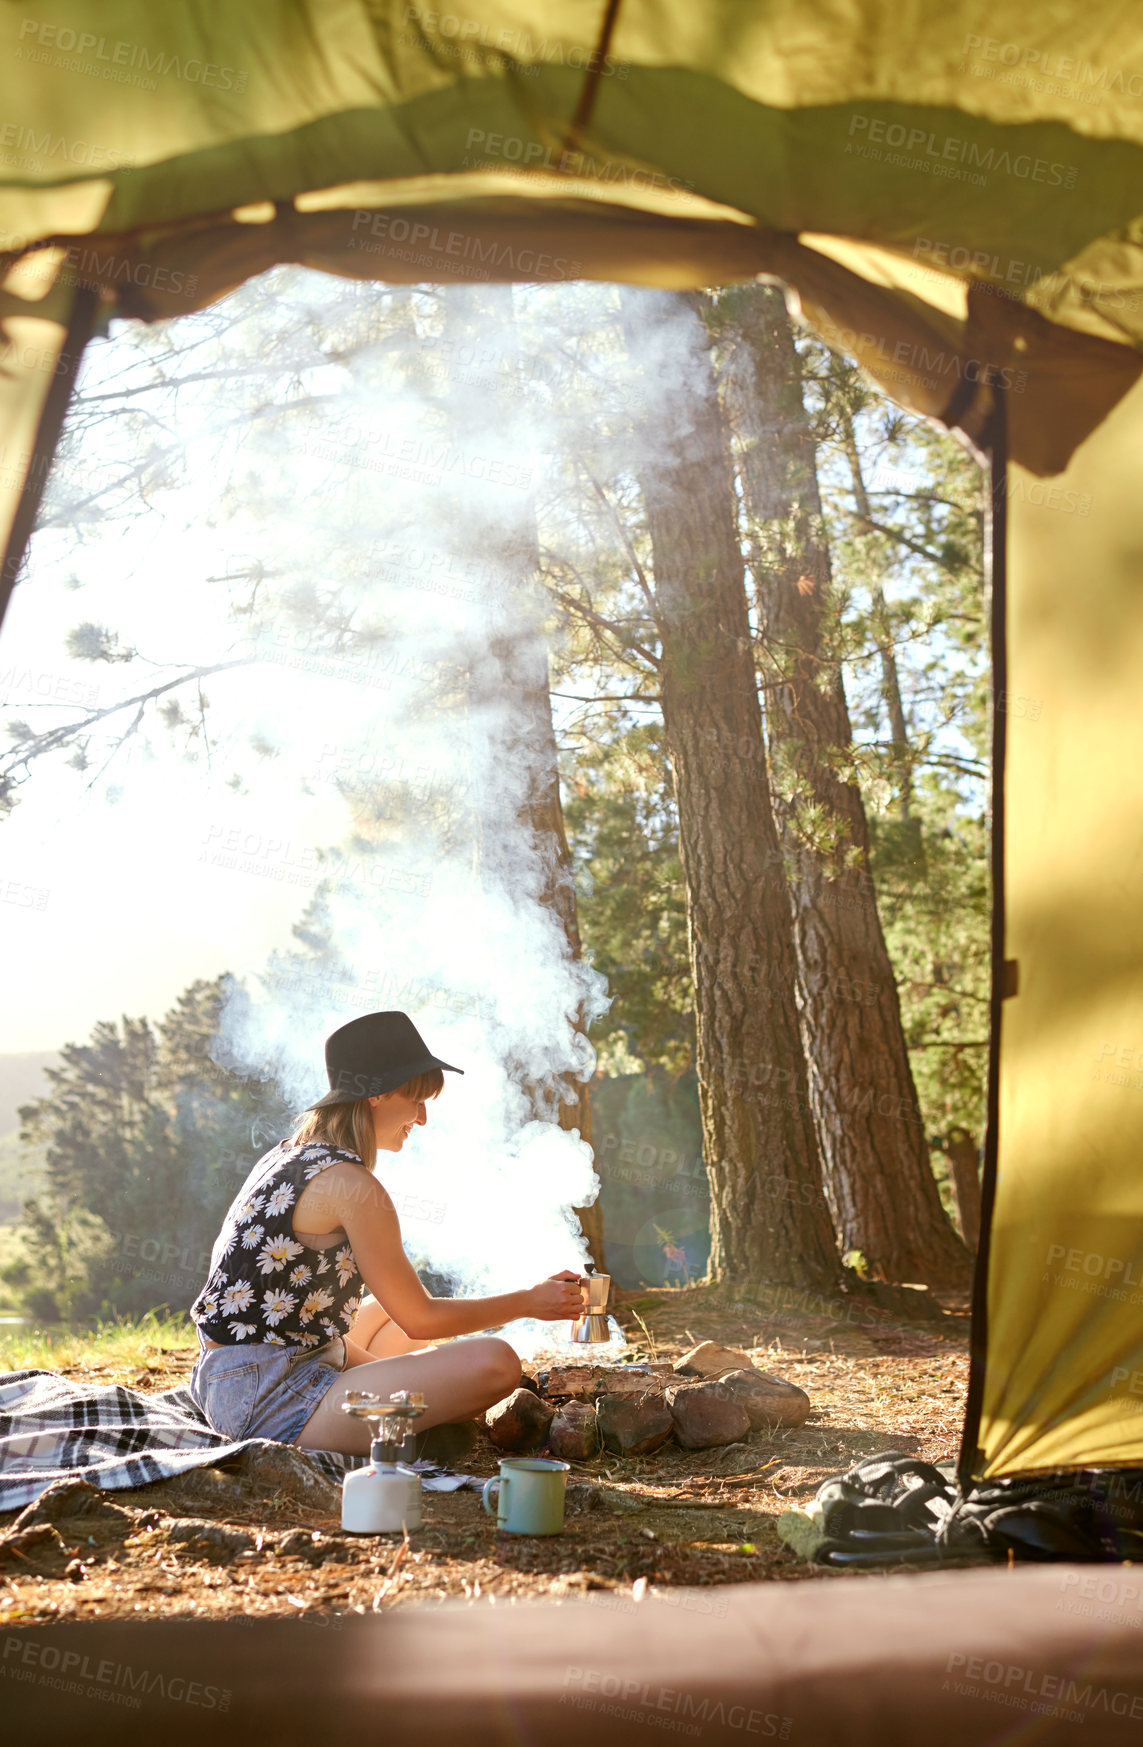 Buy stock photo Shot of a young woman making coffee over an open fire at a campsite